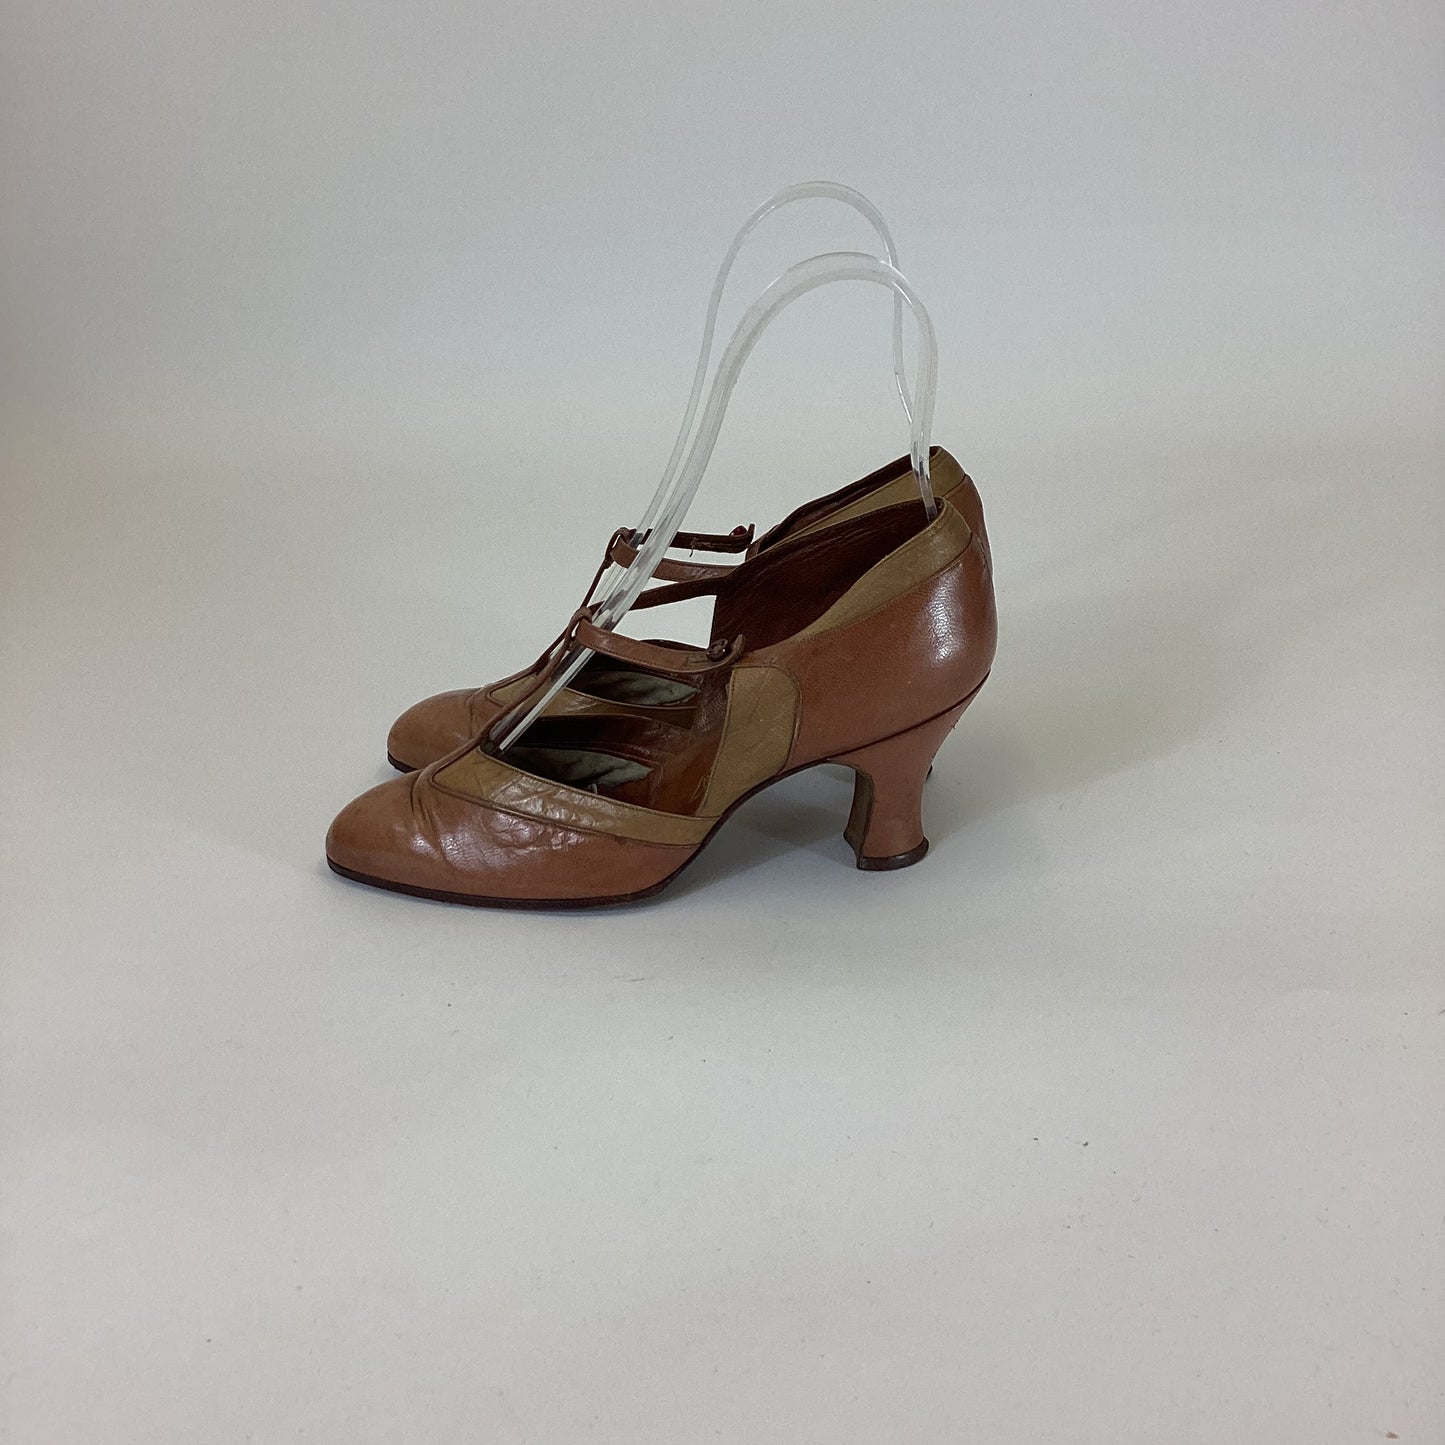 Original 20's/30's stunning 2 tone shoes - in taupe and sand colourway